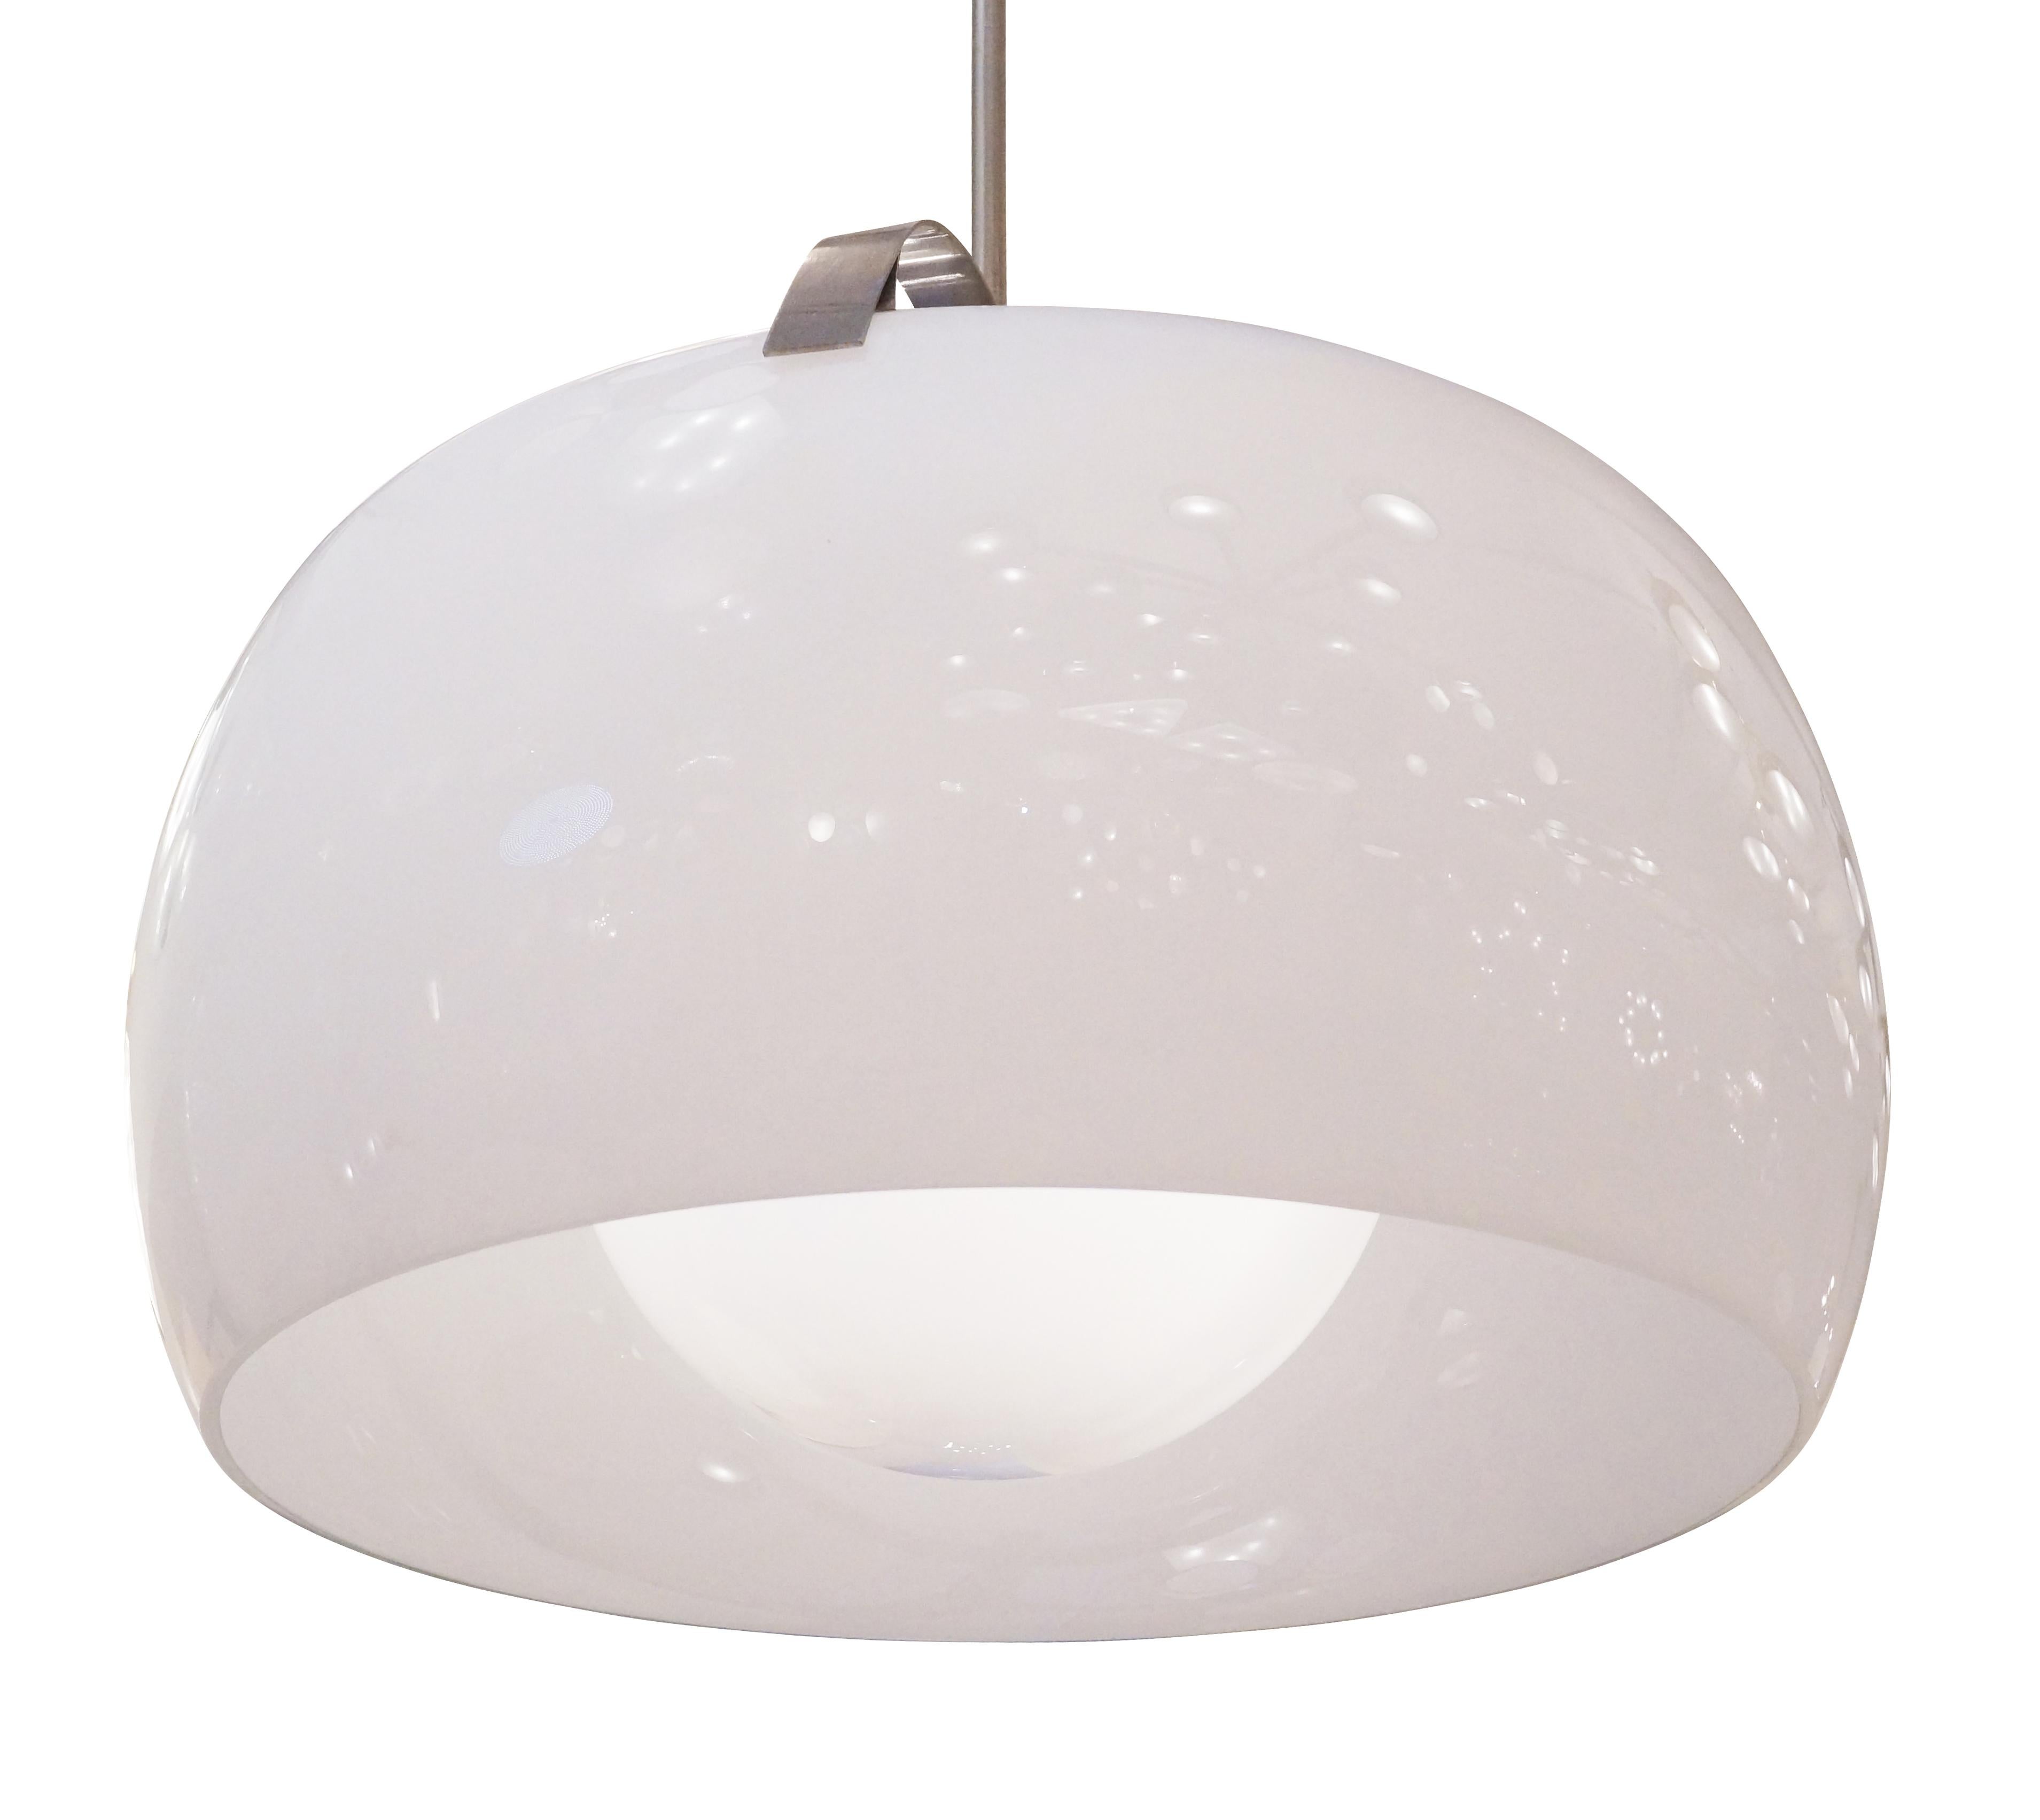 Mid-20th Century Triclinio Ceiling Light by Vico Magistretti for Artemide For Sale